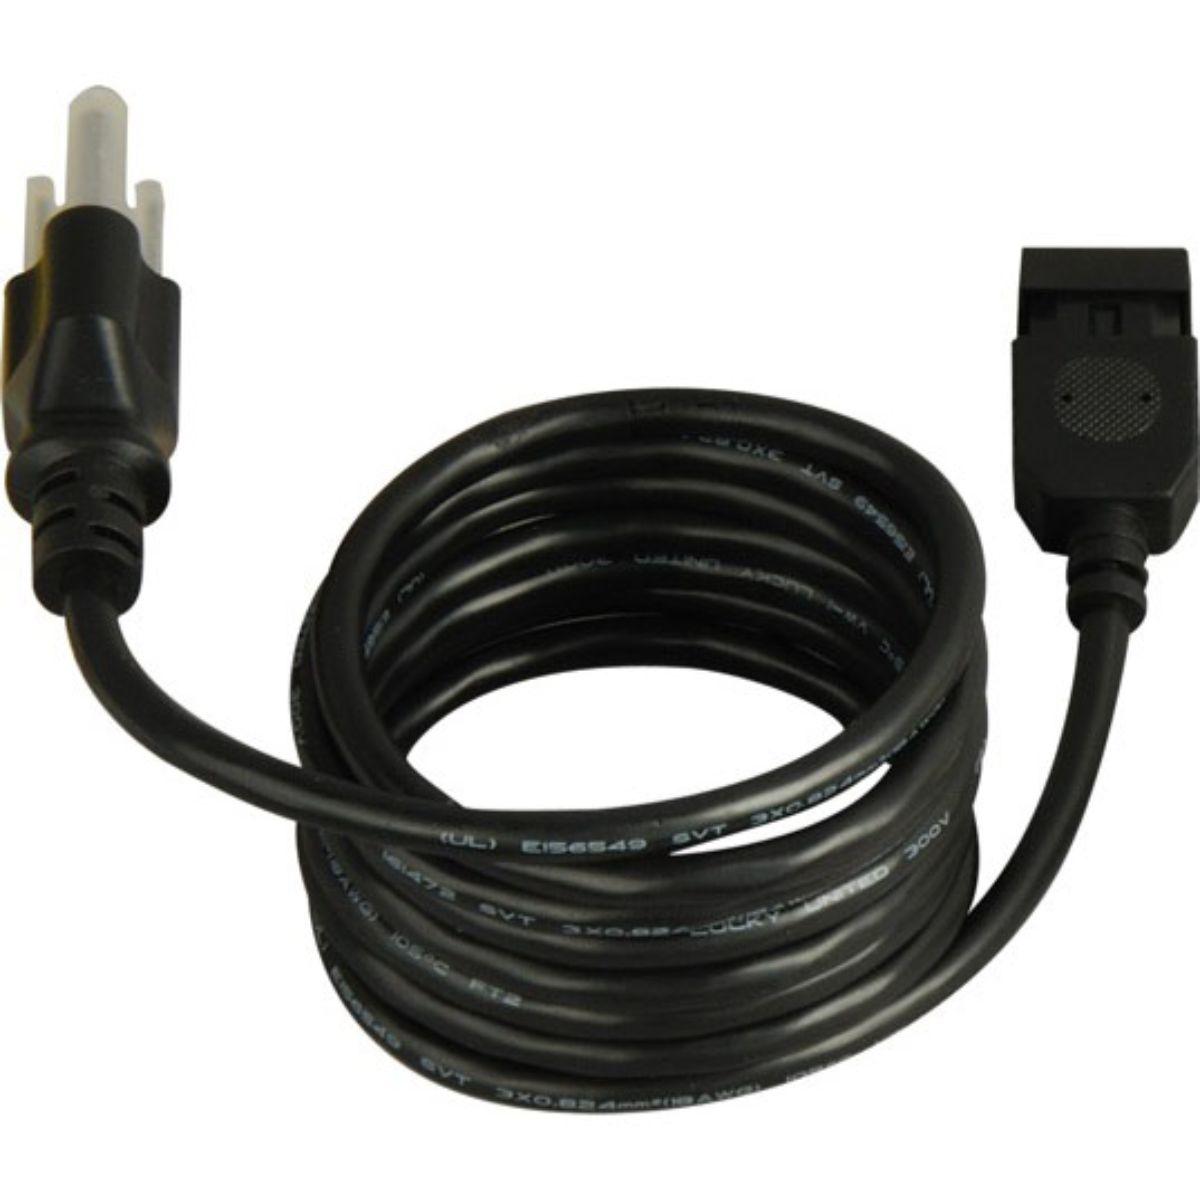 CounterMax 72in. Power Cord, Black - Bees Lighting